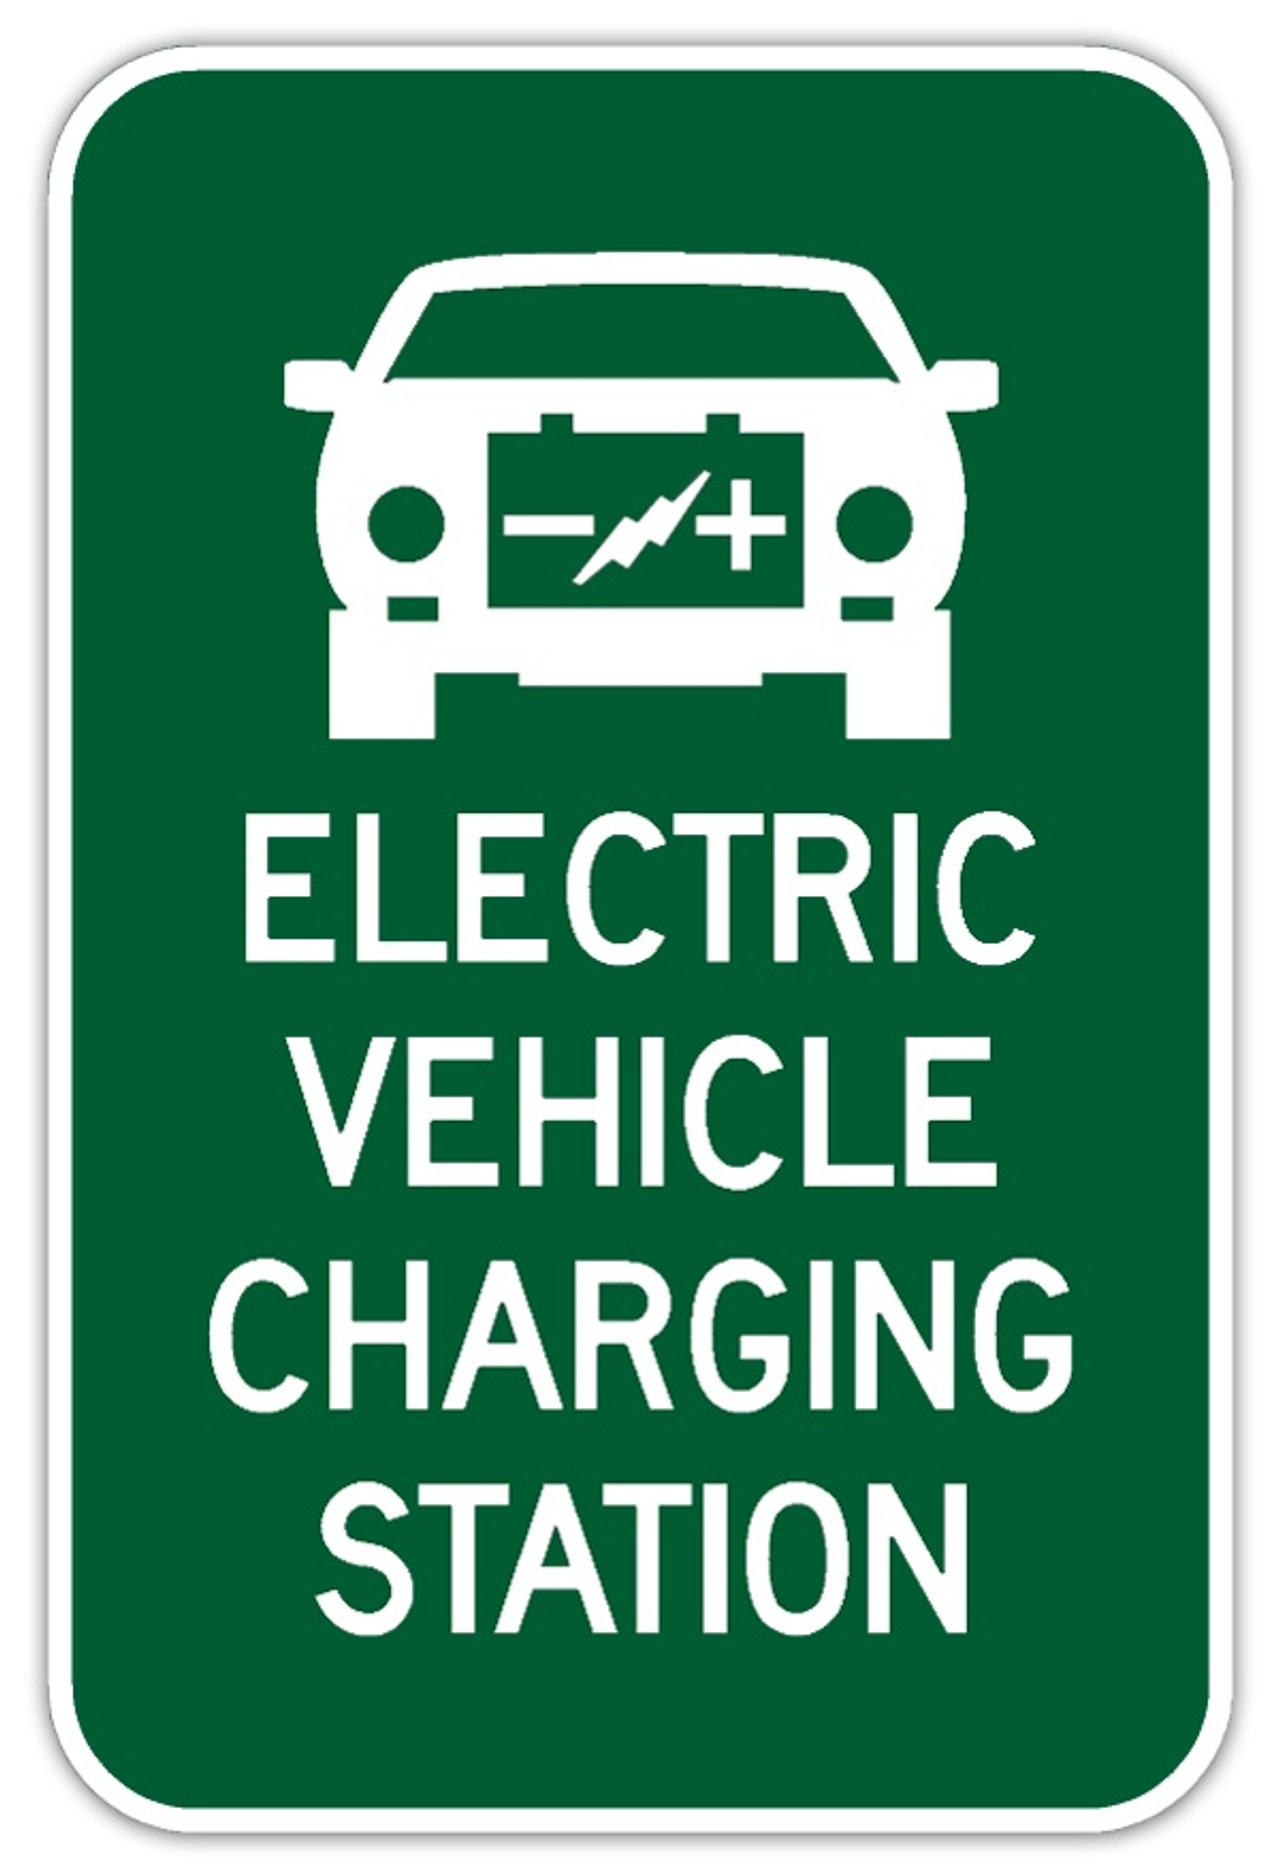 Electric Vehicle Charging Station Signs From Dornbos Sign & Safety